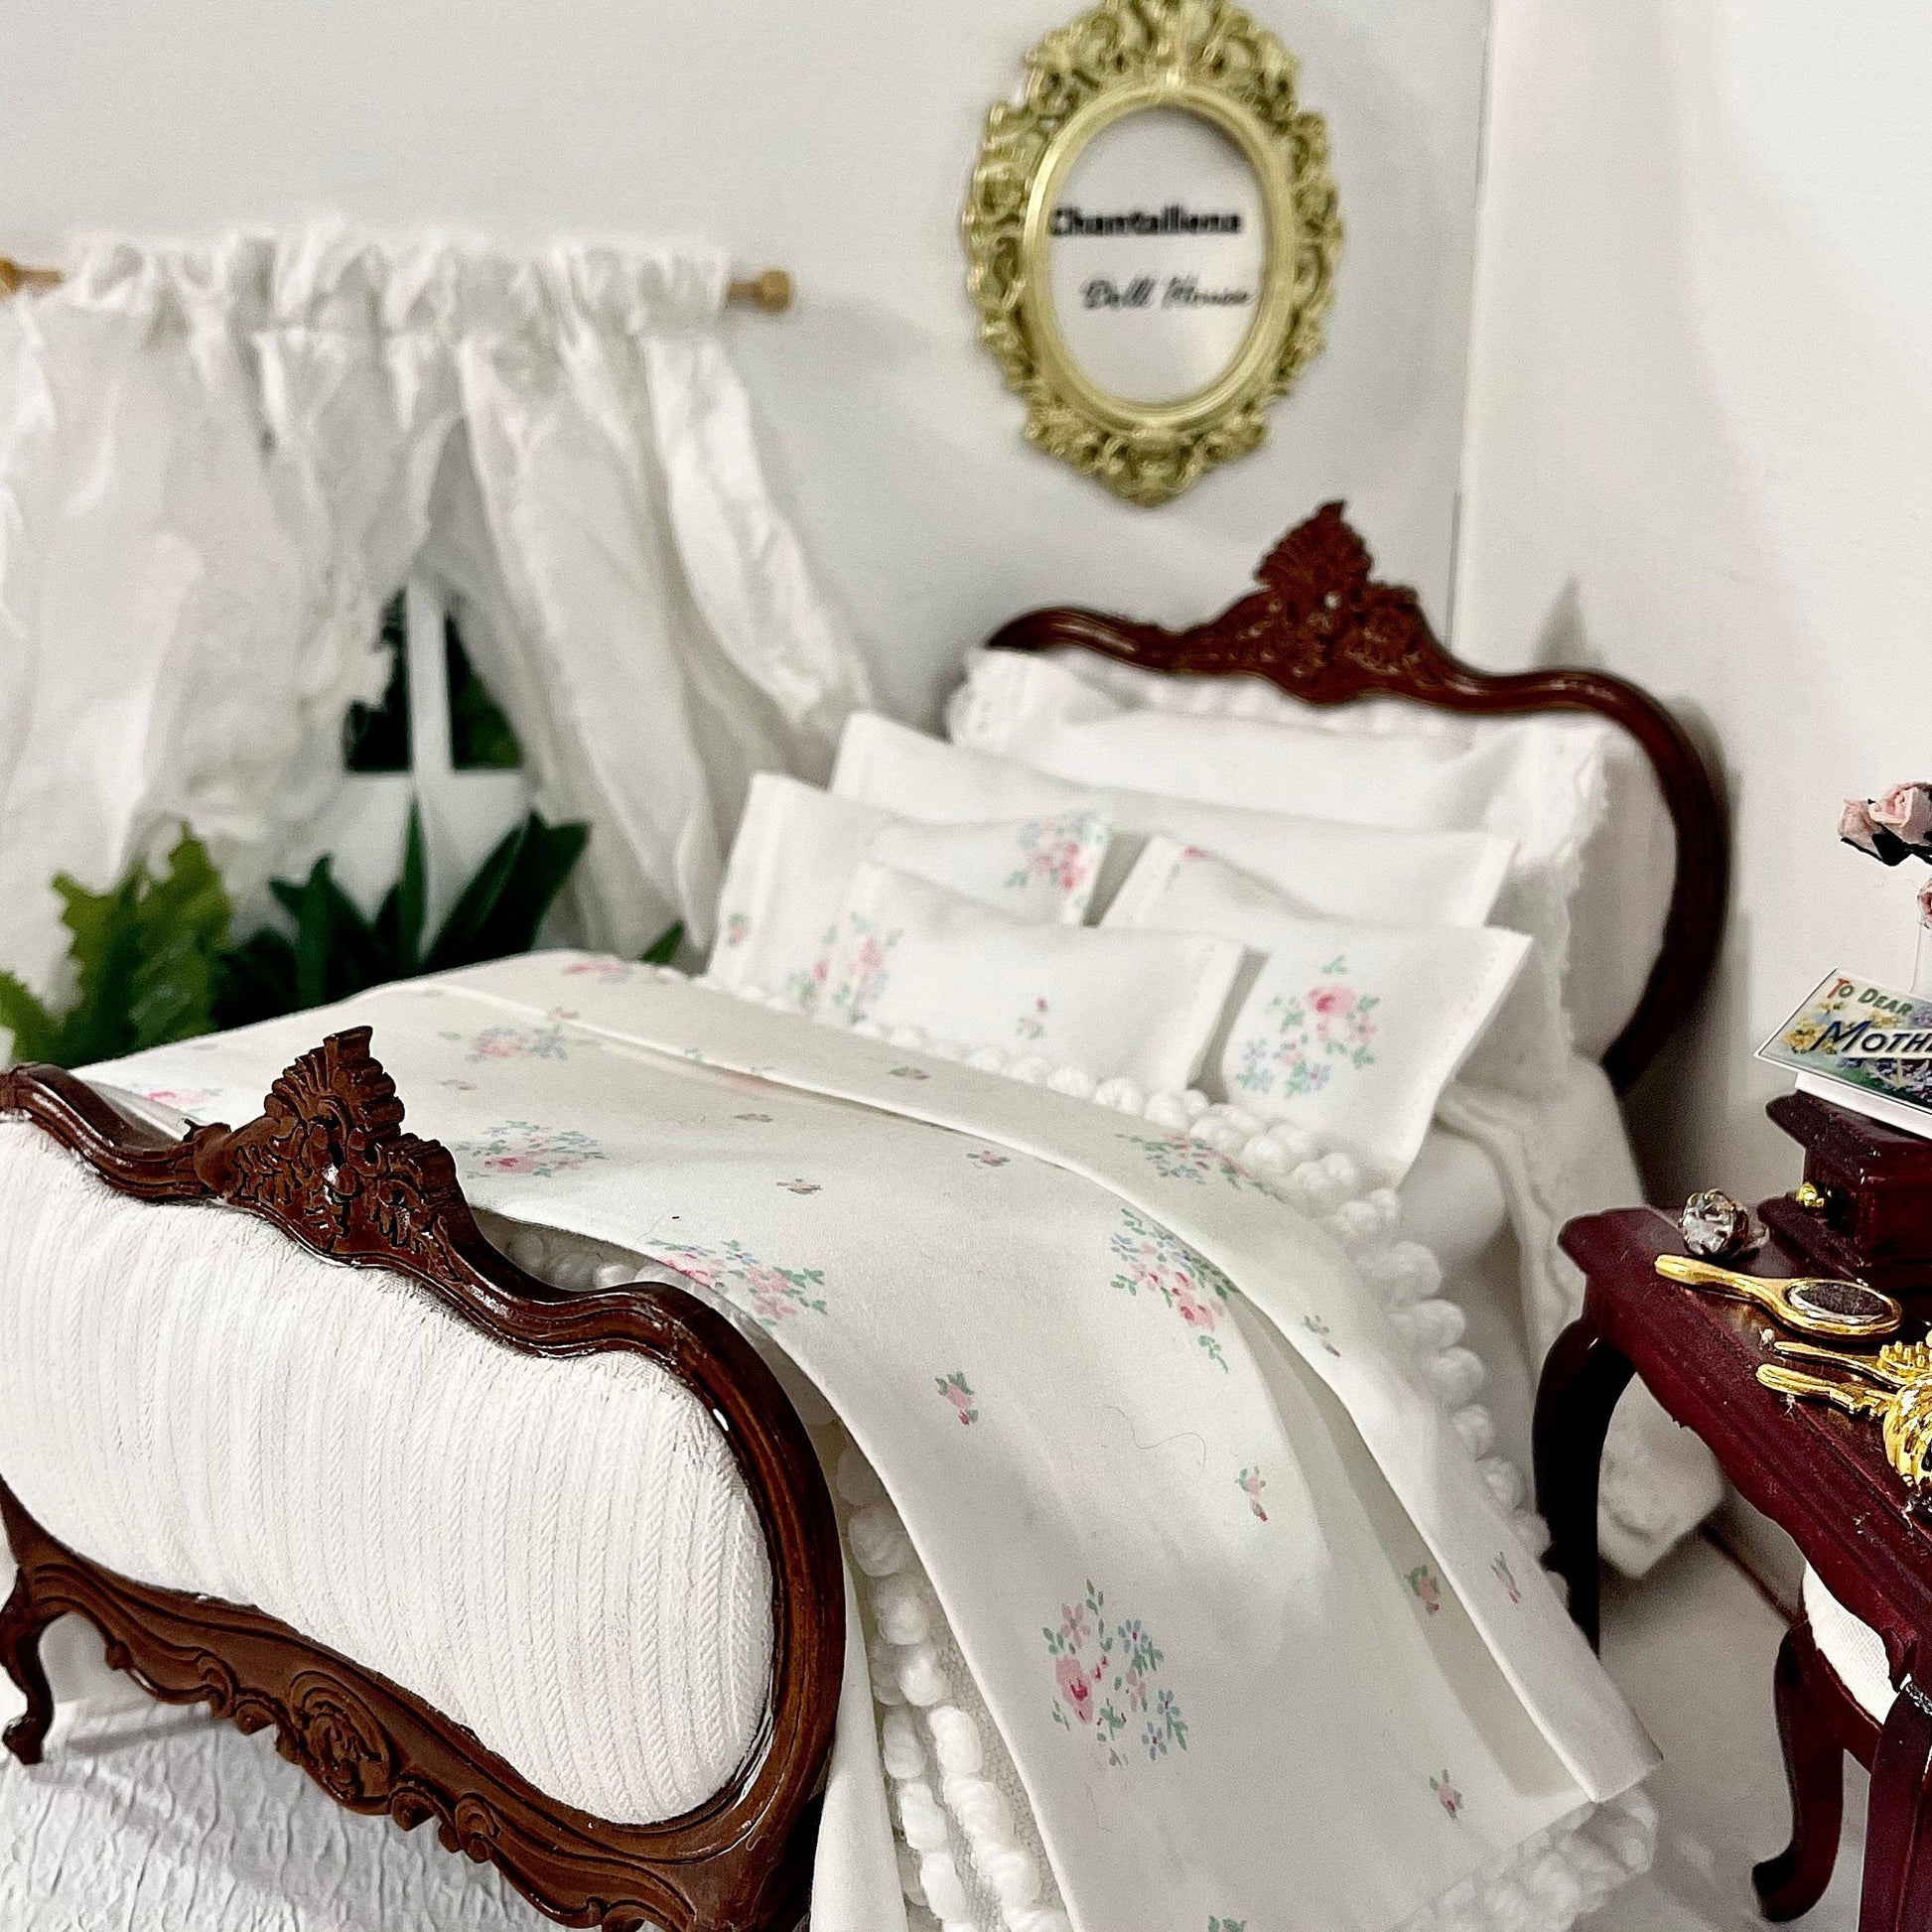 Chantallena Doll House Shabby Cottage -  Eight Piece White Cotton Bedding Set with Petite Blue & Pink Roses Bed Runner